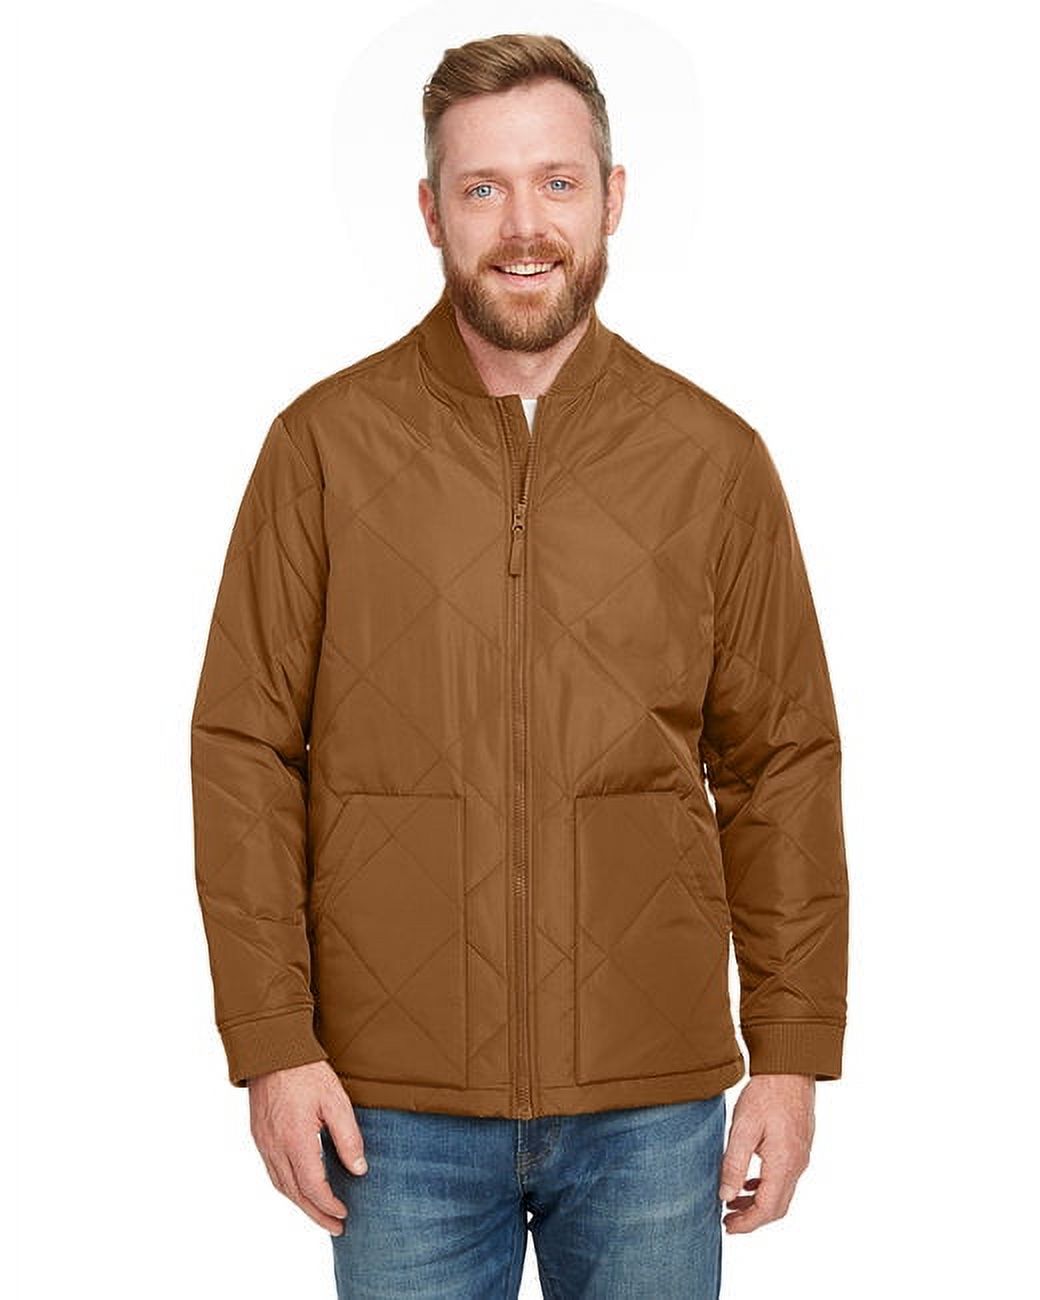 Adult Dockside Insulated Utility Jacket - DUCK BROWN - M - image 1 of 3